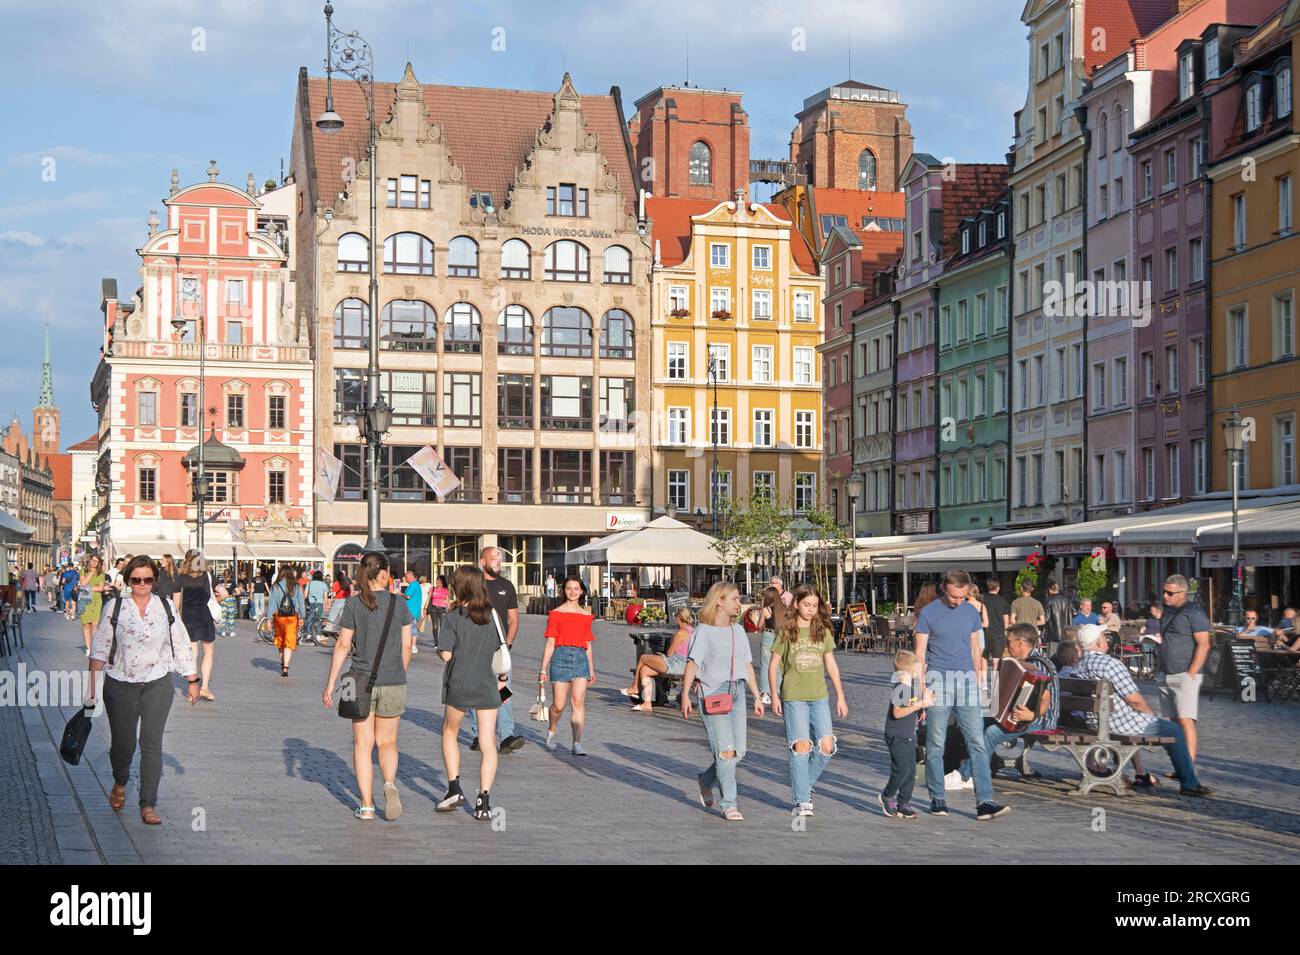 People in the Square, in evening light, Wroclaw Stock Photo